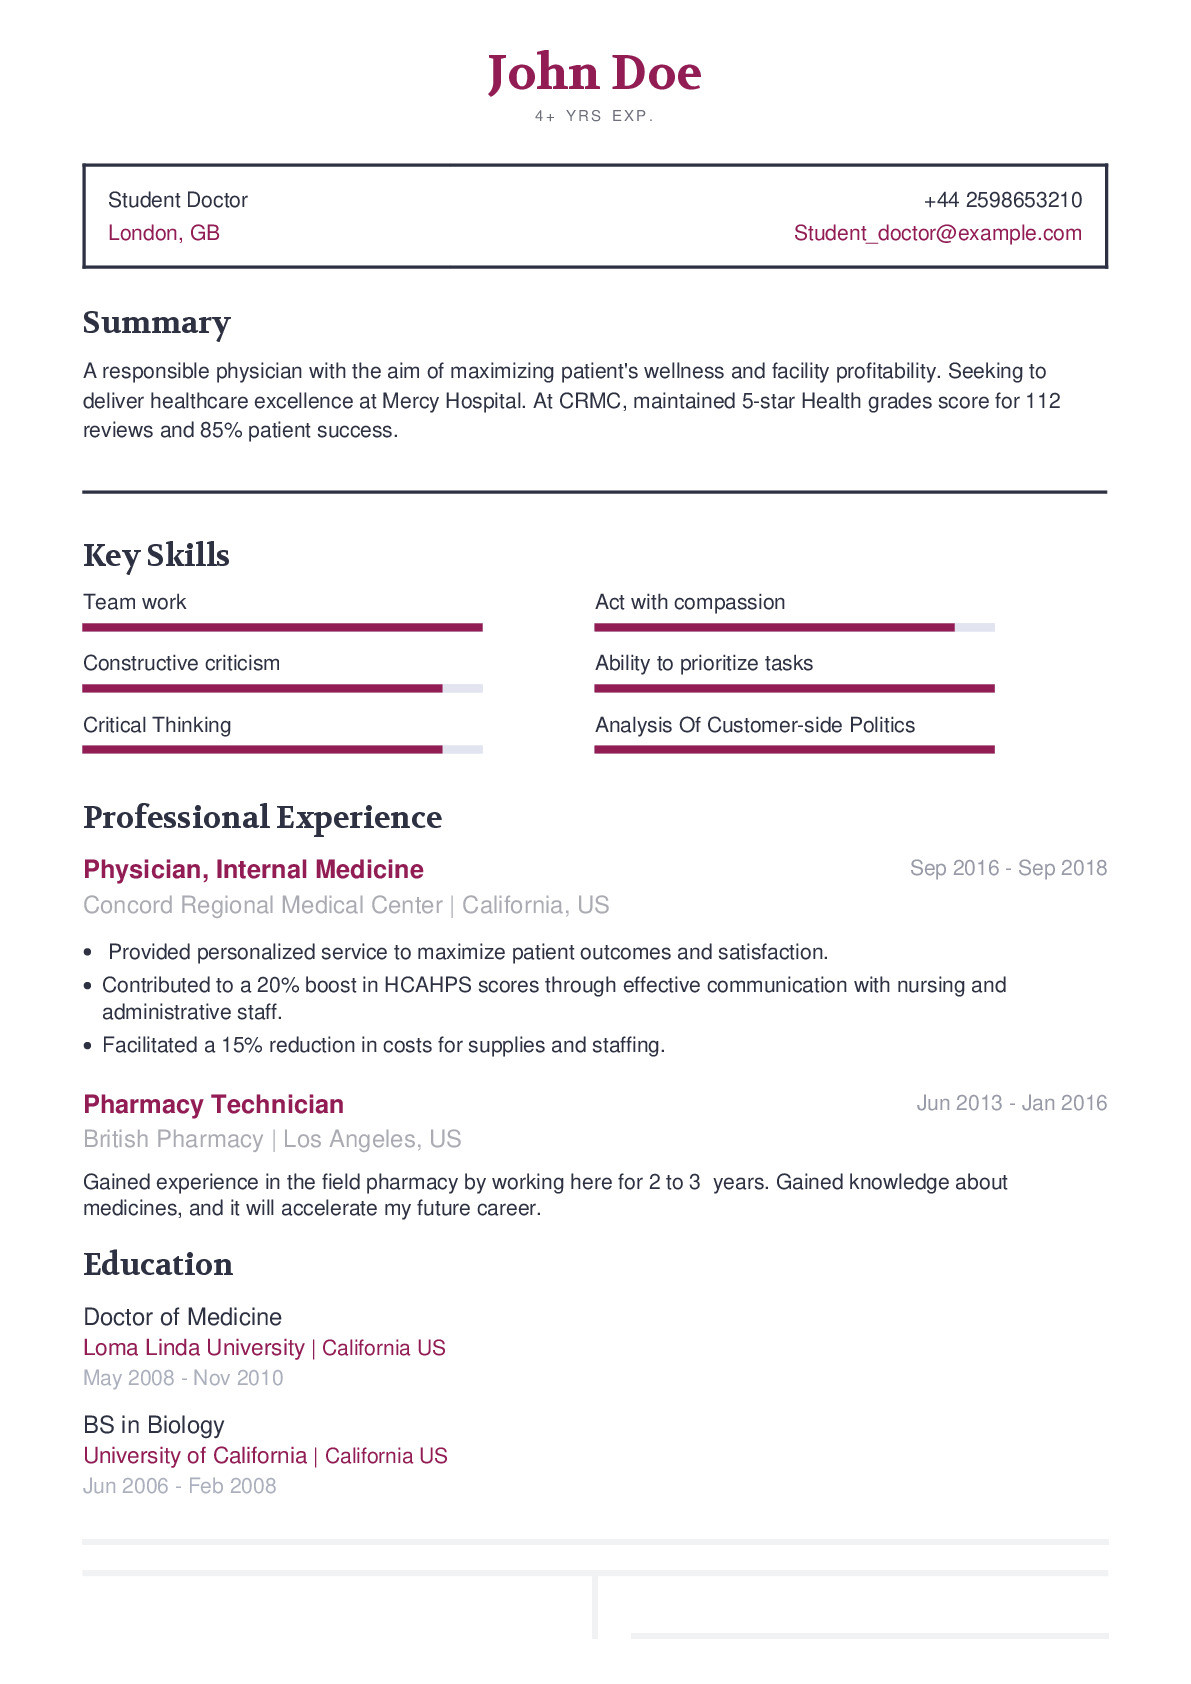 Sample Stanford Institute Of Medicine Resume Student Doctor Resume Example with Content Sample Craftmycv